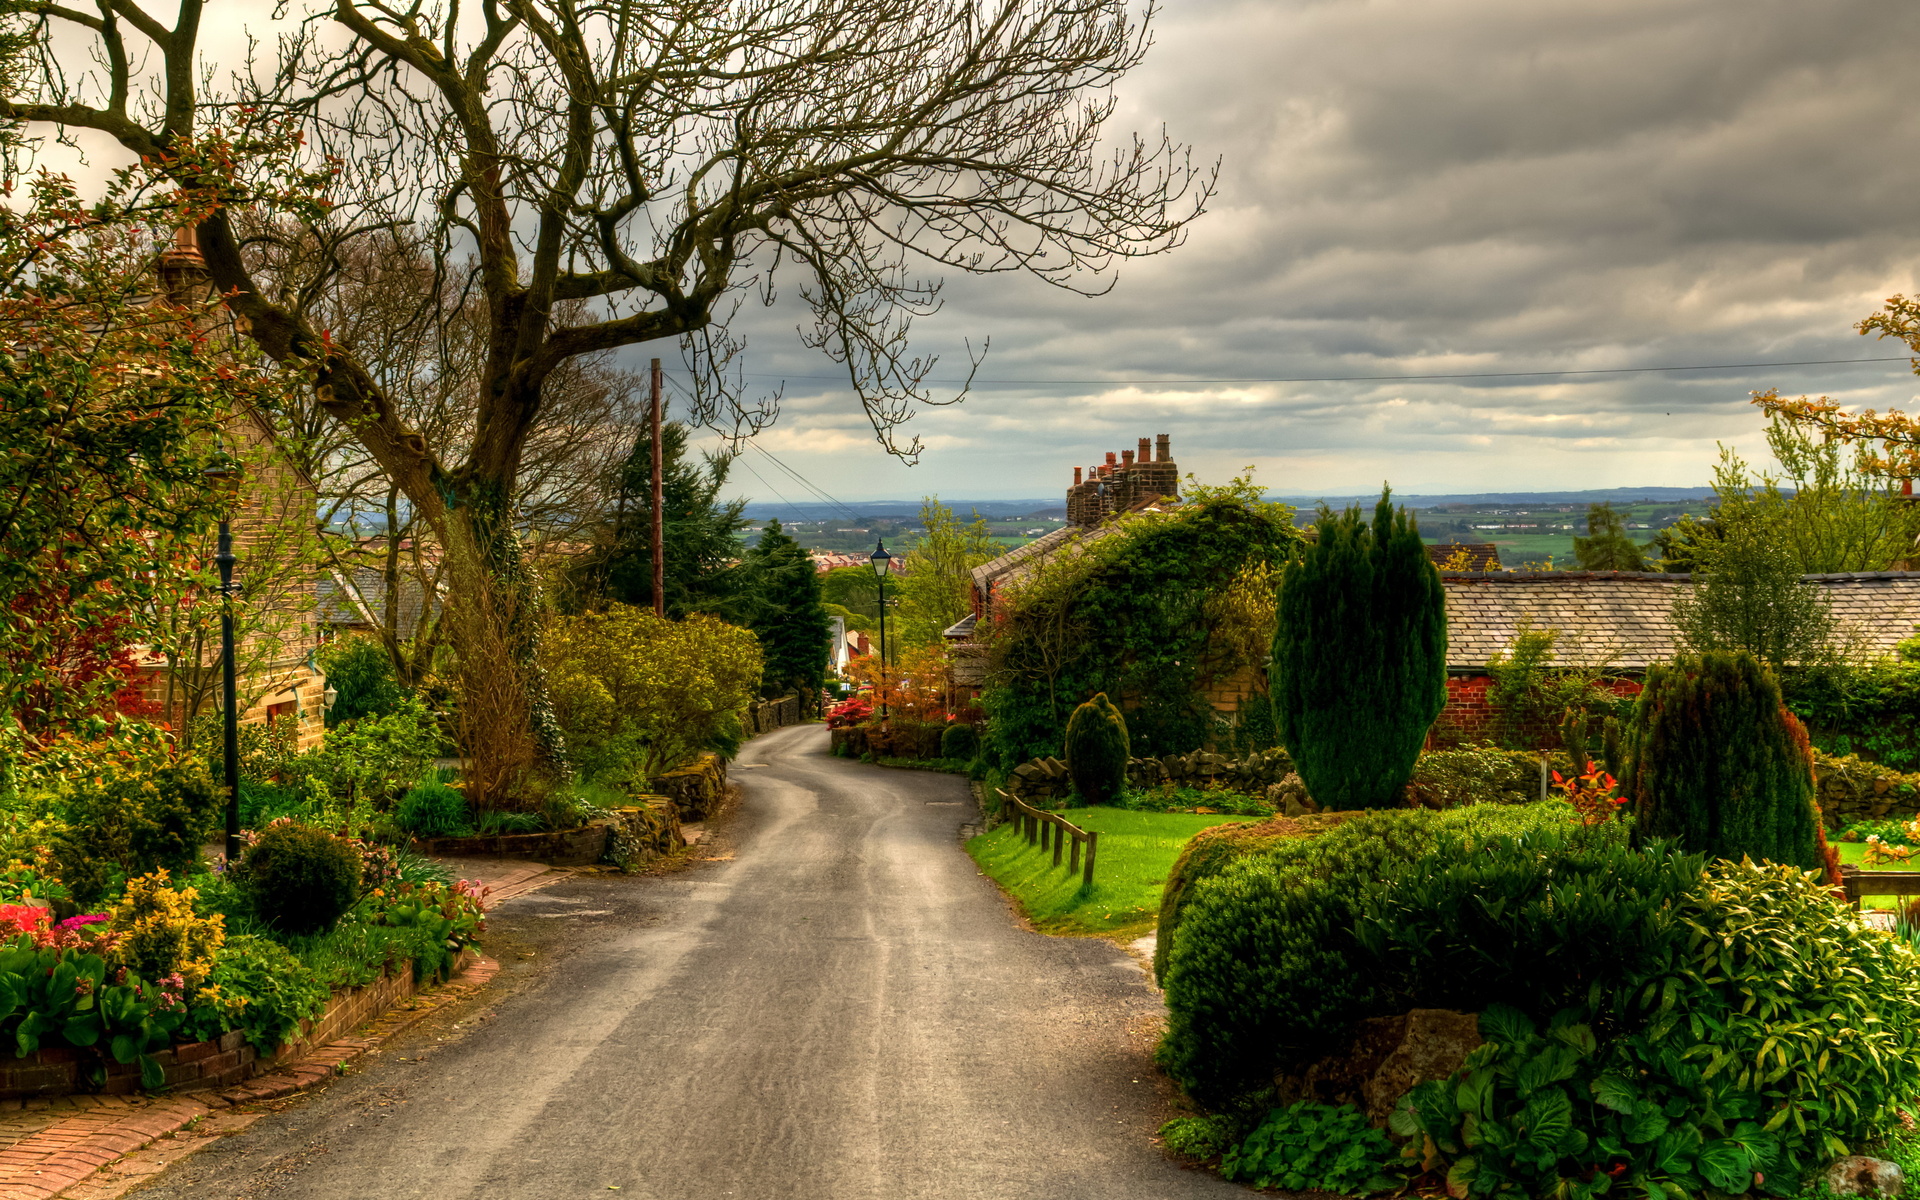 uk, Road, England, Horwich, Trees, Shrubs, Nature, Landscapes, Town, Village, Buildings, Houses, Architecture, Sky, Clouds Wallpaper